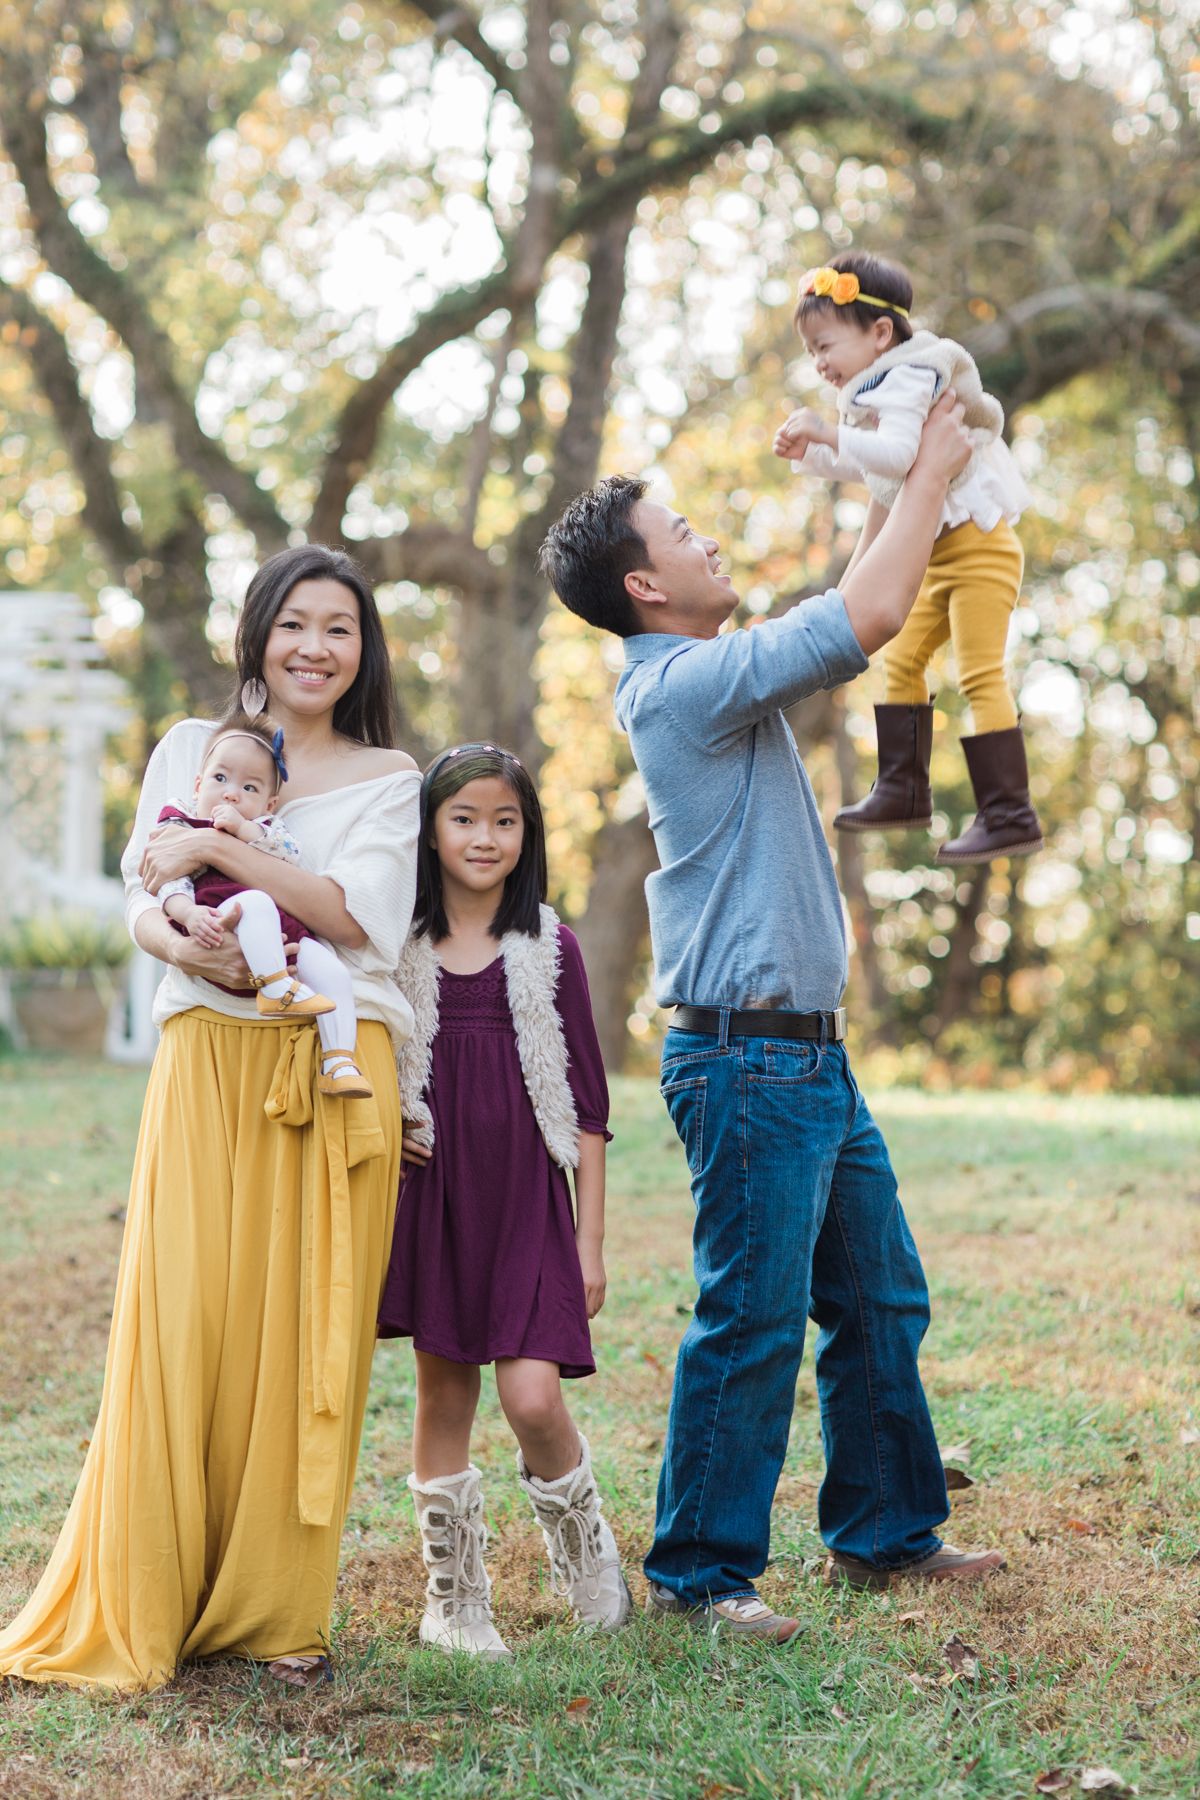 Contrast-and-colors. 70+ Best Family Photoshoot Outfit Ideas That You Must Check